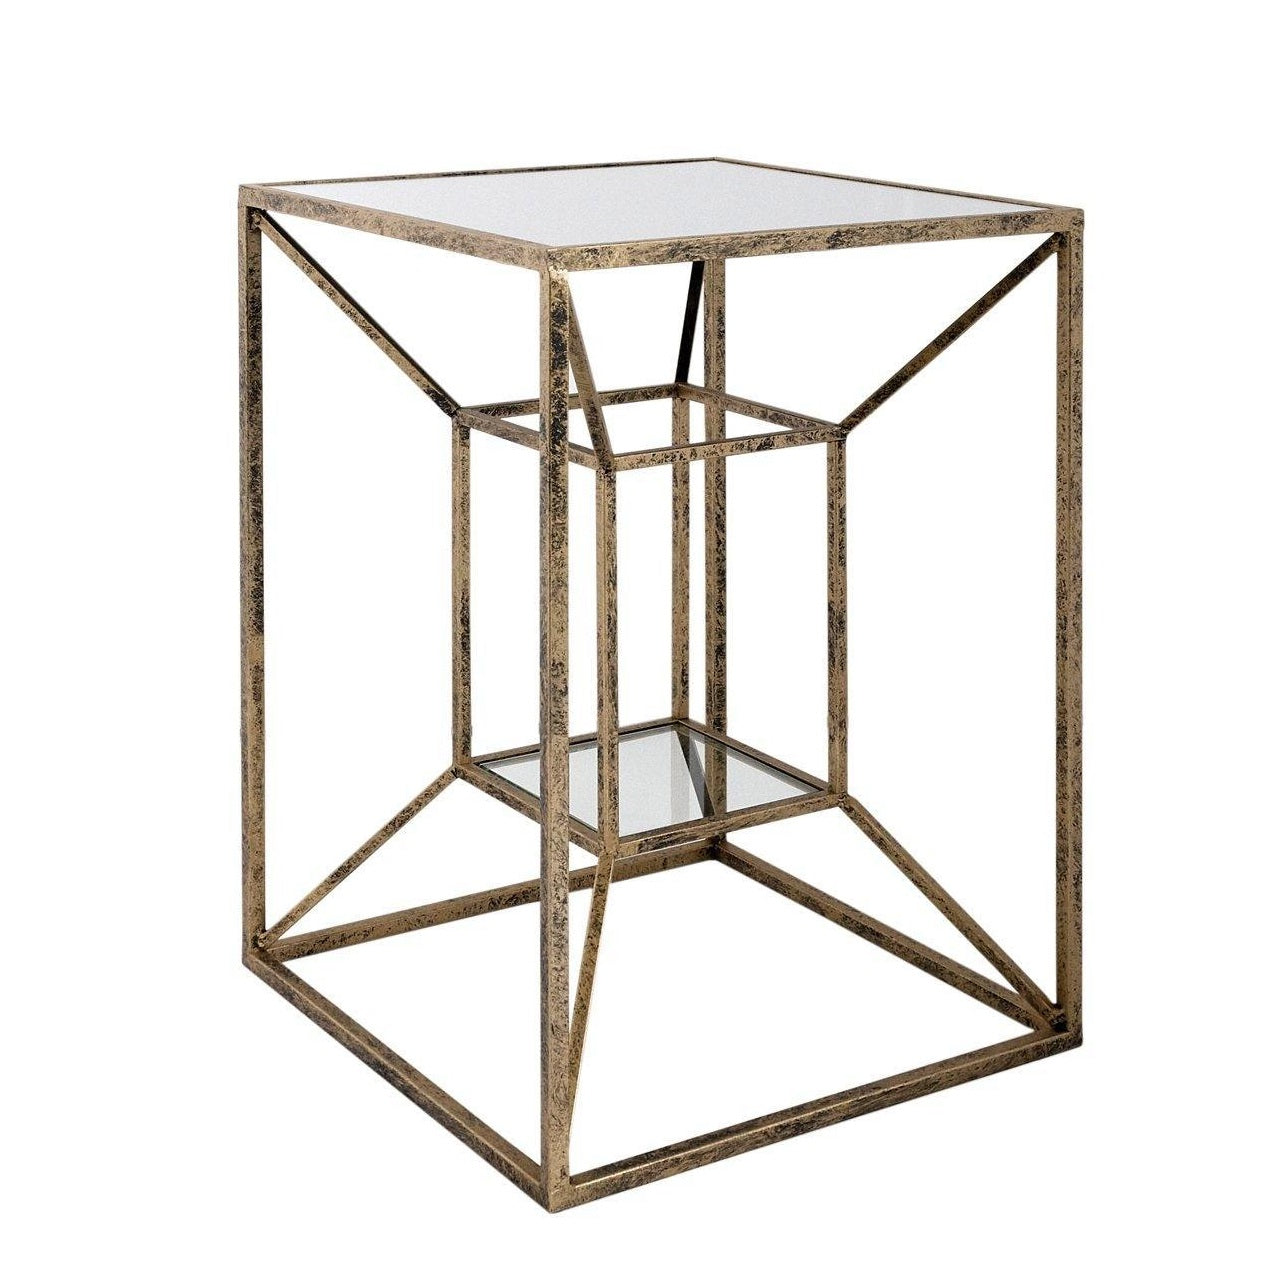 Mindy Brownes Interiors Solomon Side Table  Solomon Side Table  Gold and black framed side table with mirrored top and glass bottom shelf.